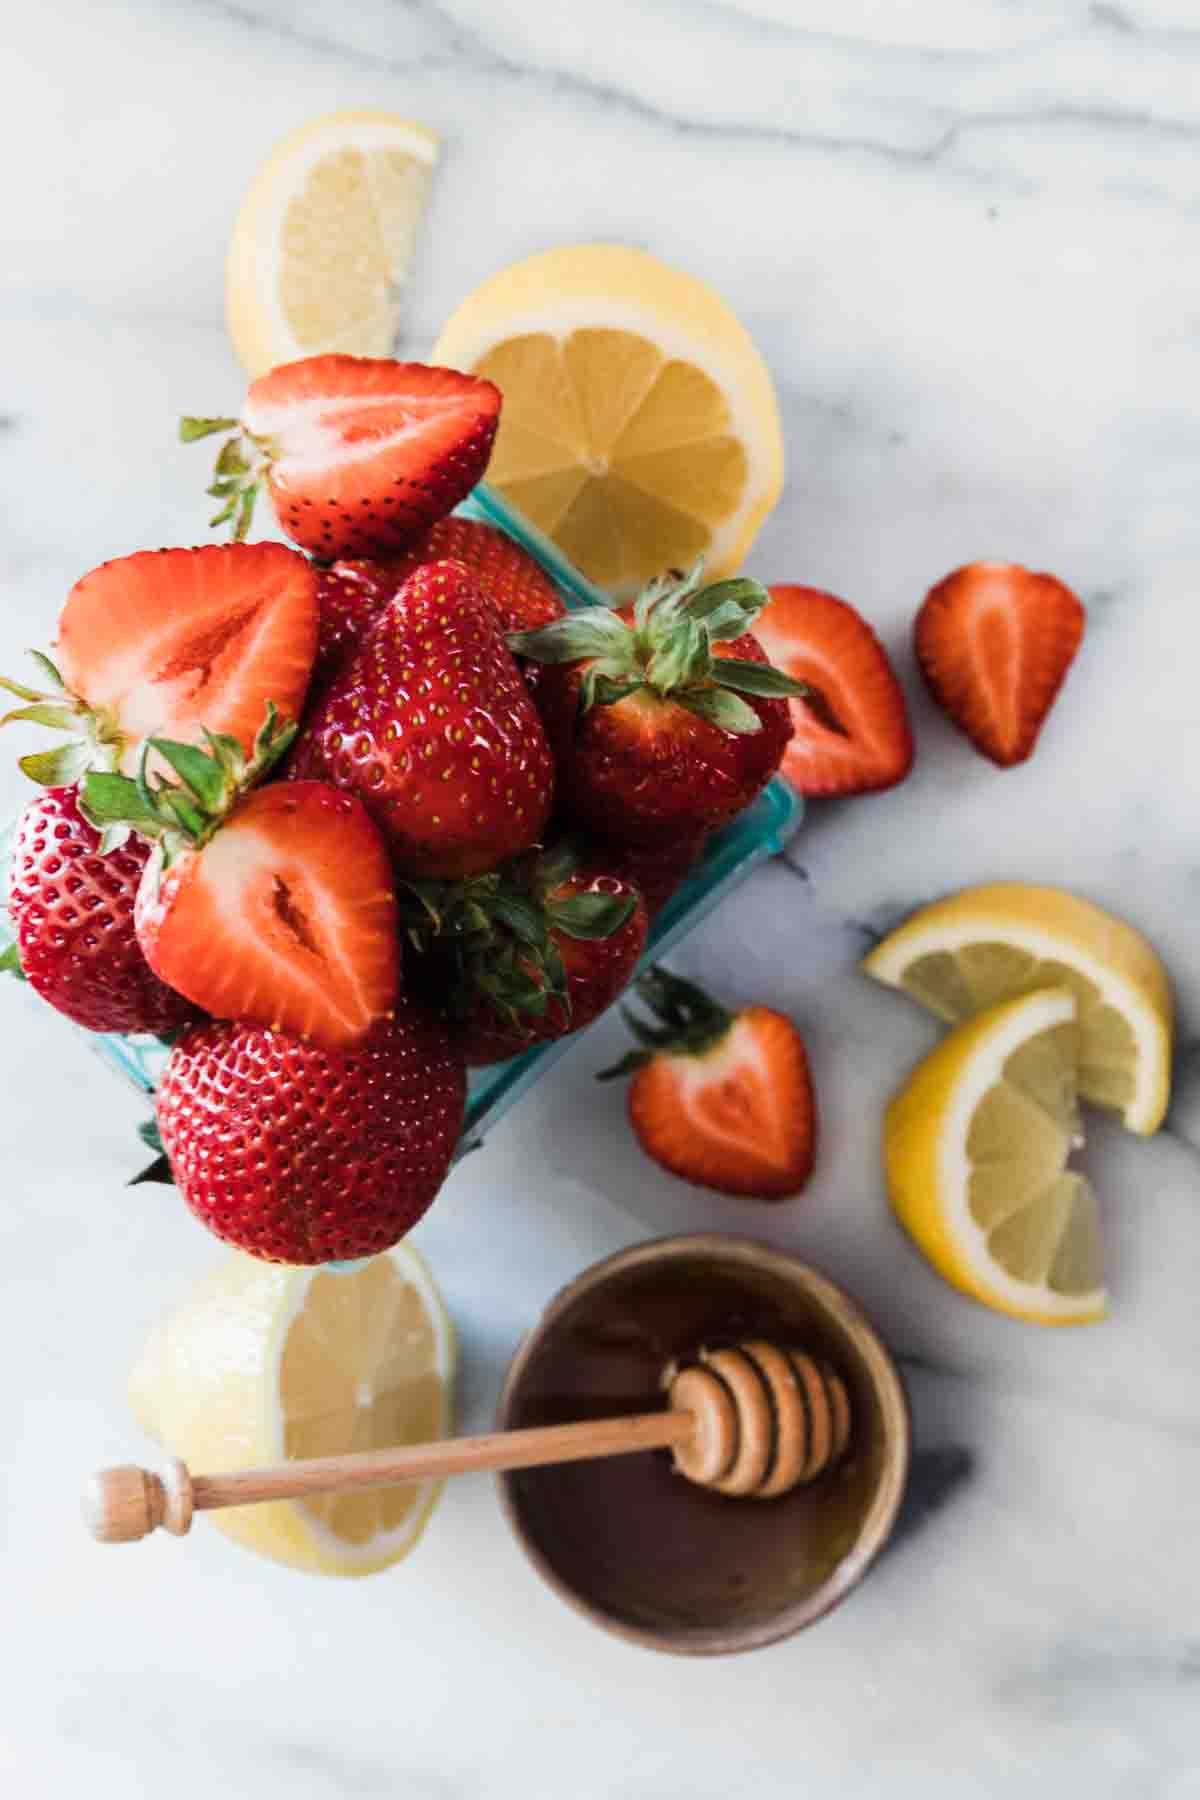 A pint of strawberries, some lemon slices, and a small bowl of honey on a marble counter.